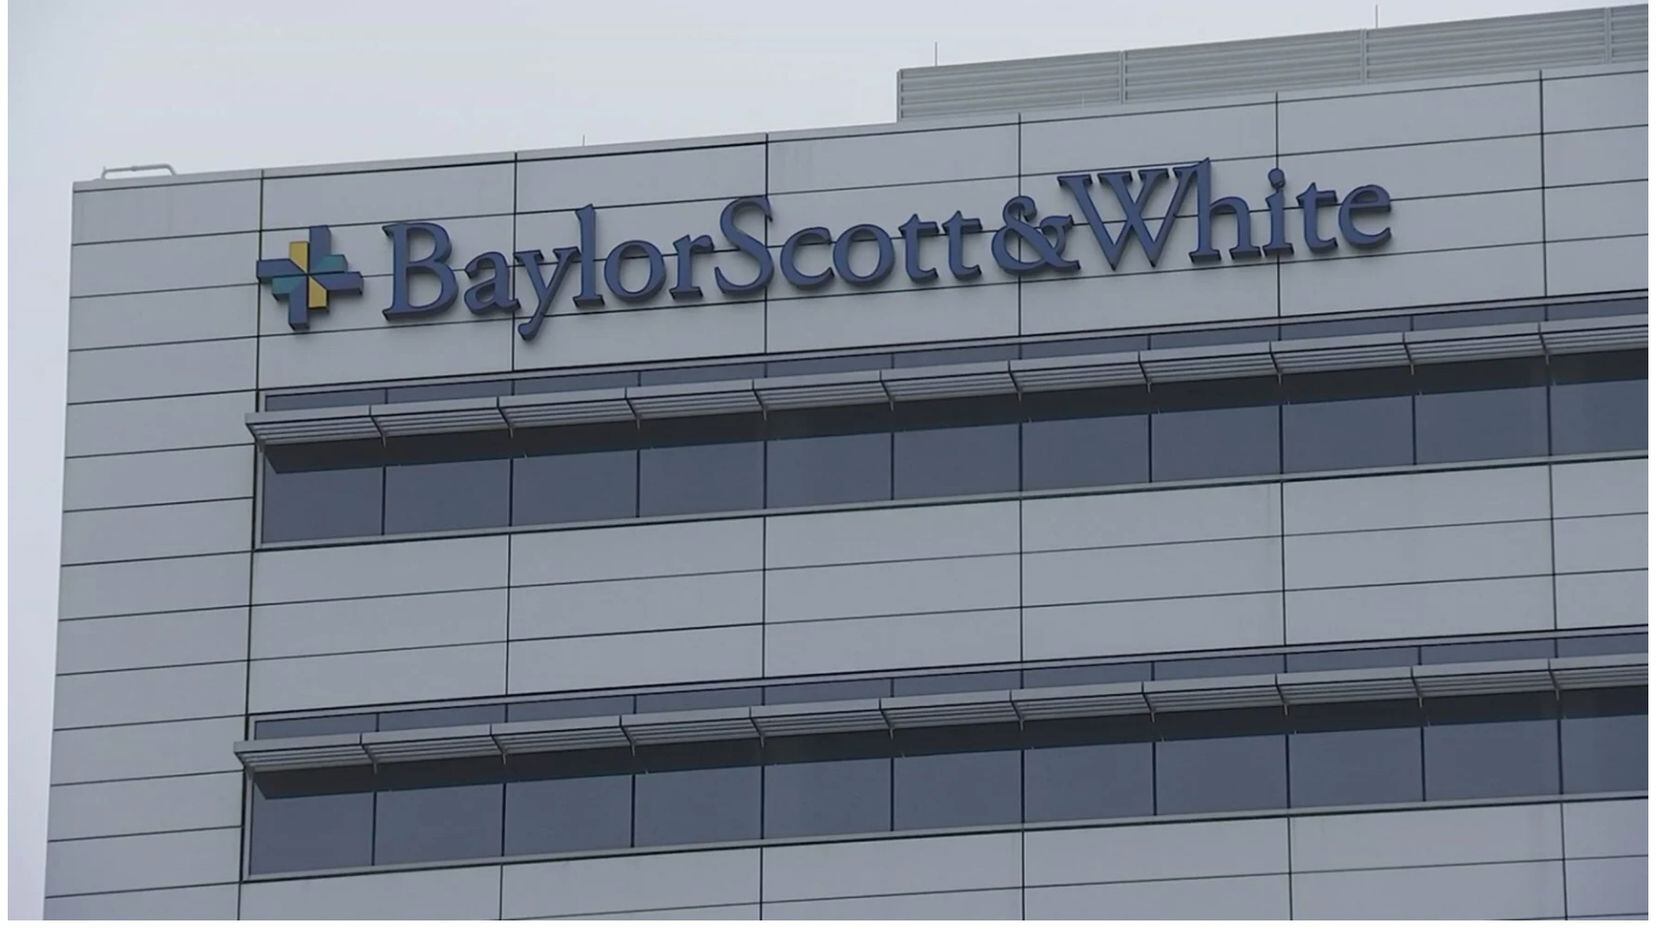 Two buildings in Mesquite occupied by Baylor Scott & White were included in the sale.